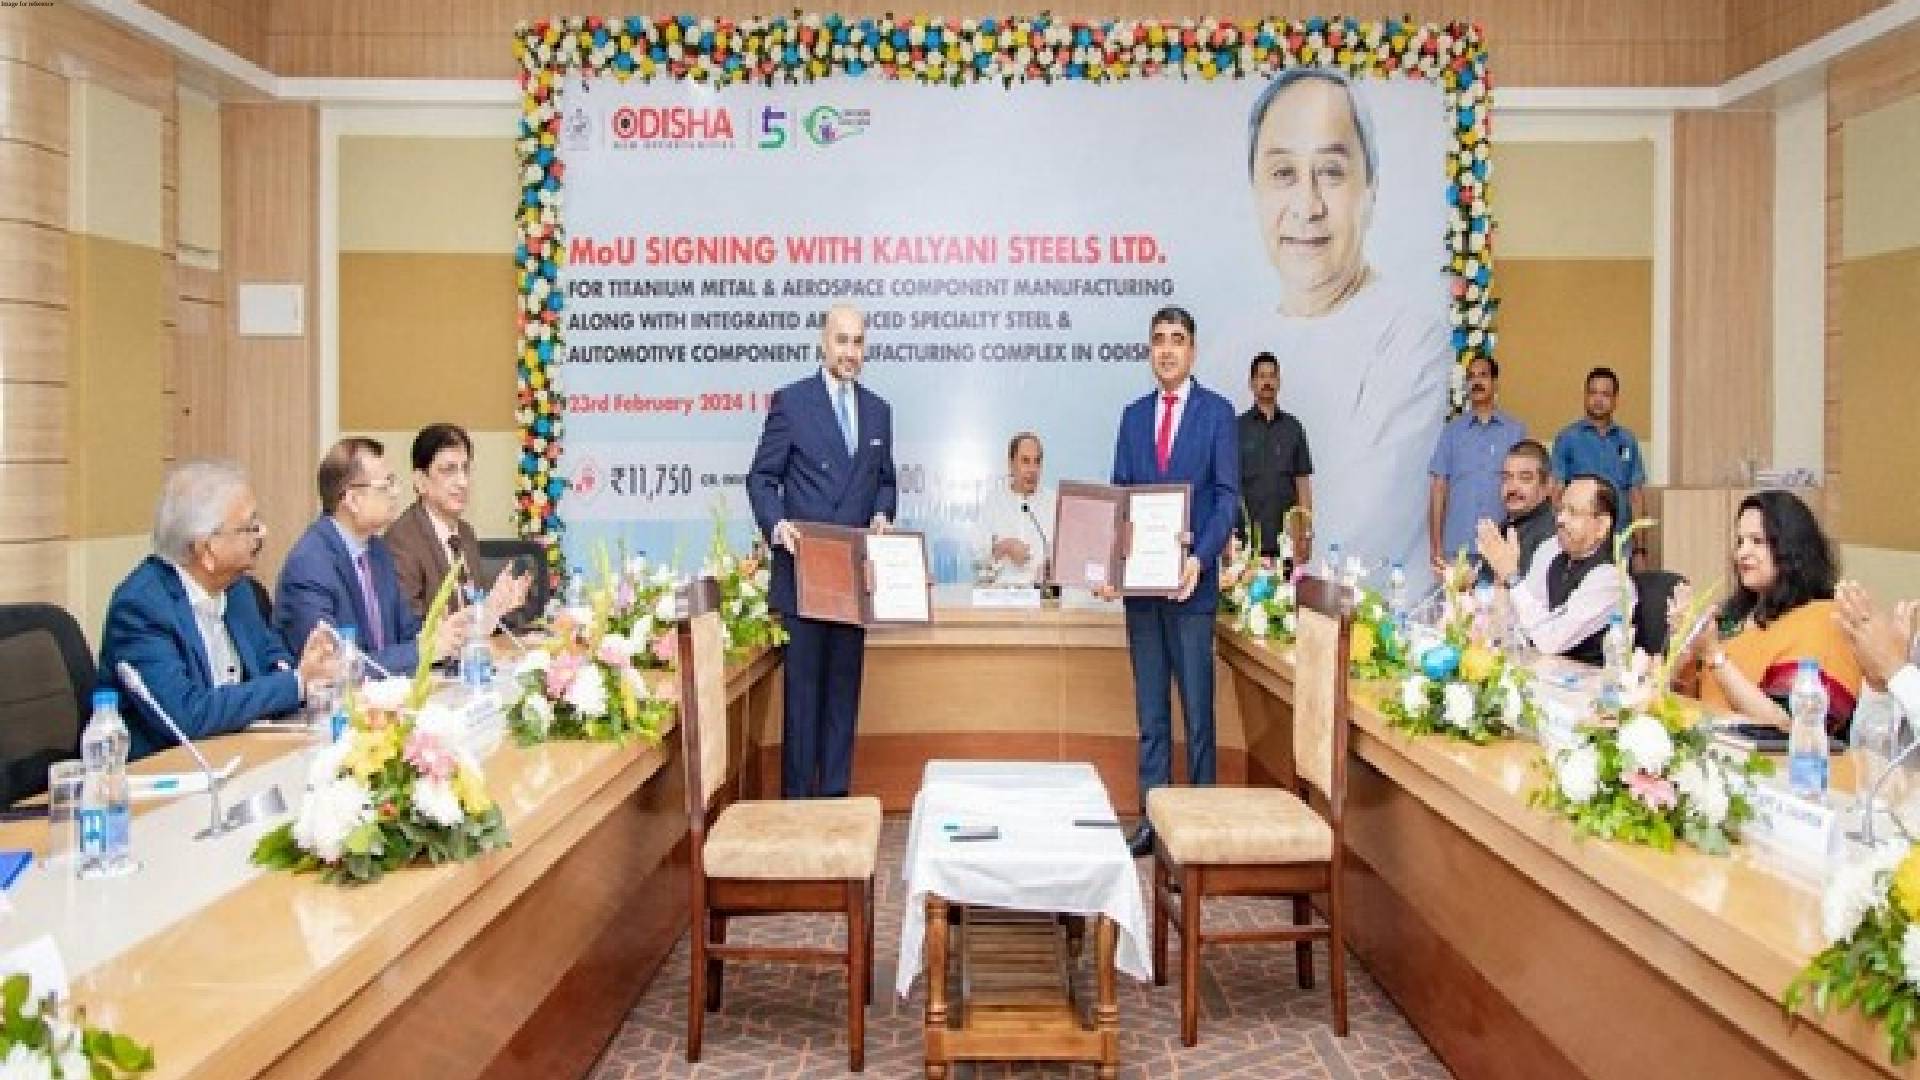 Kalyani Steel signs MoU with Odisha Government for multi-billion-dollar manufacturing complex